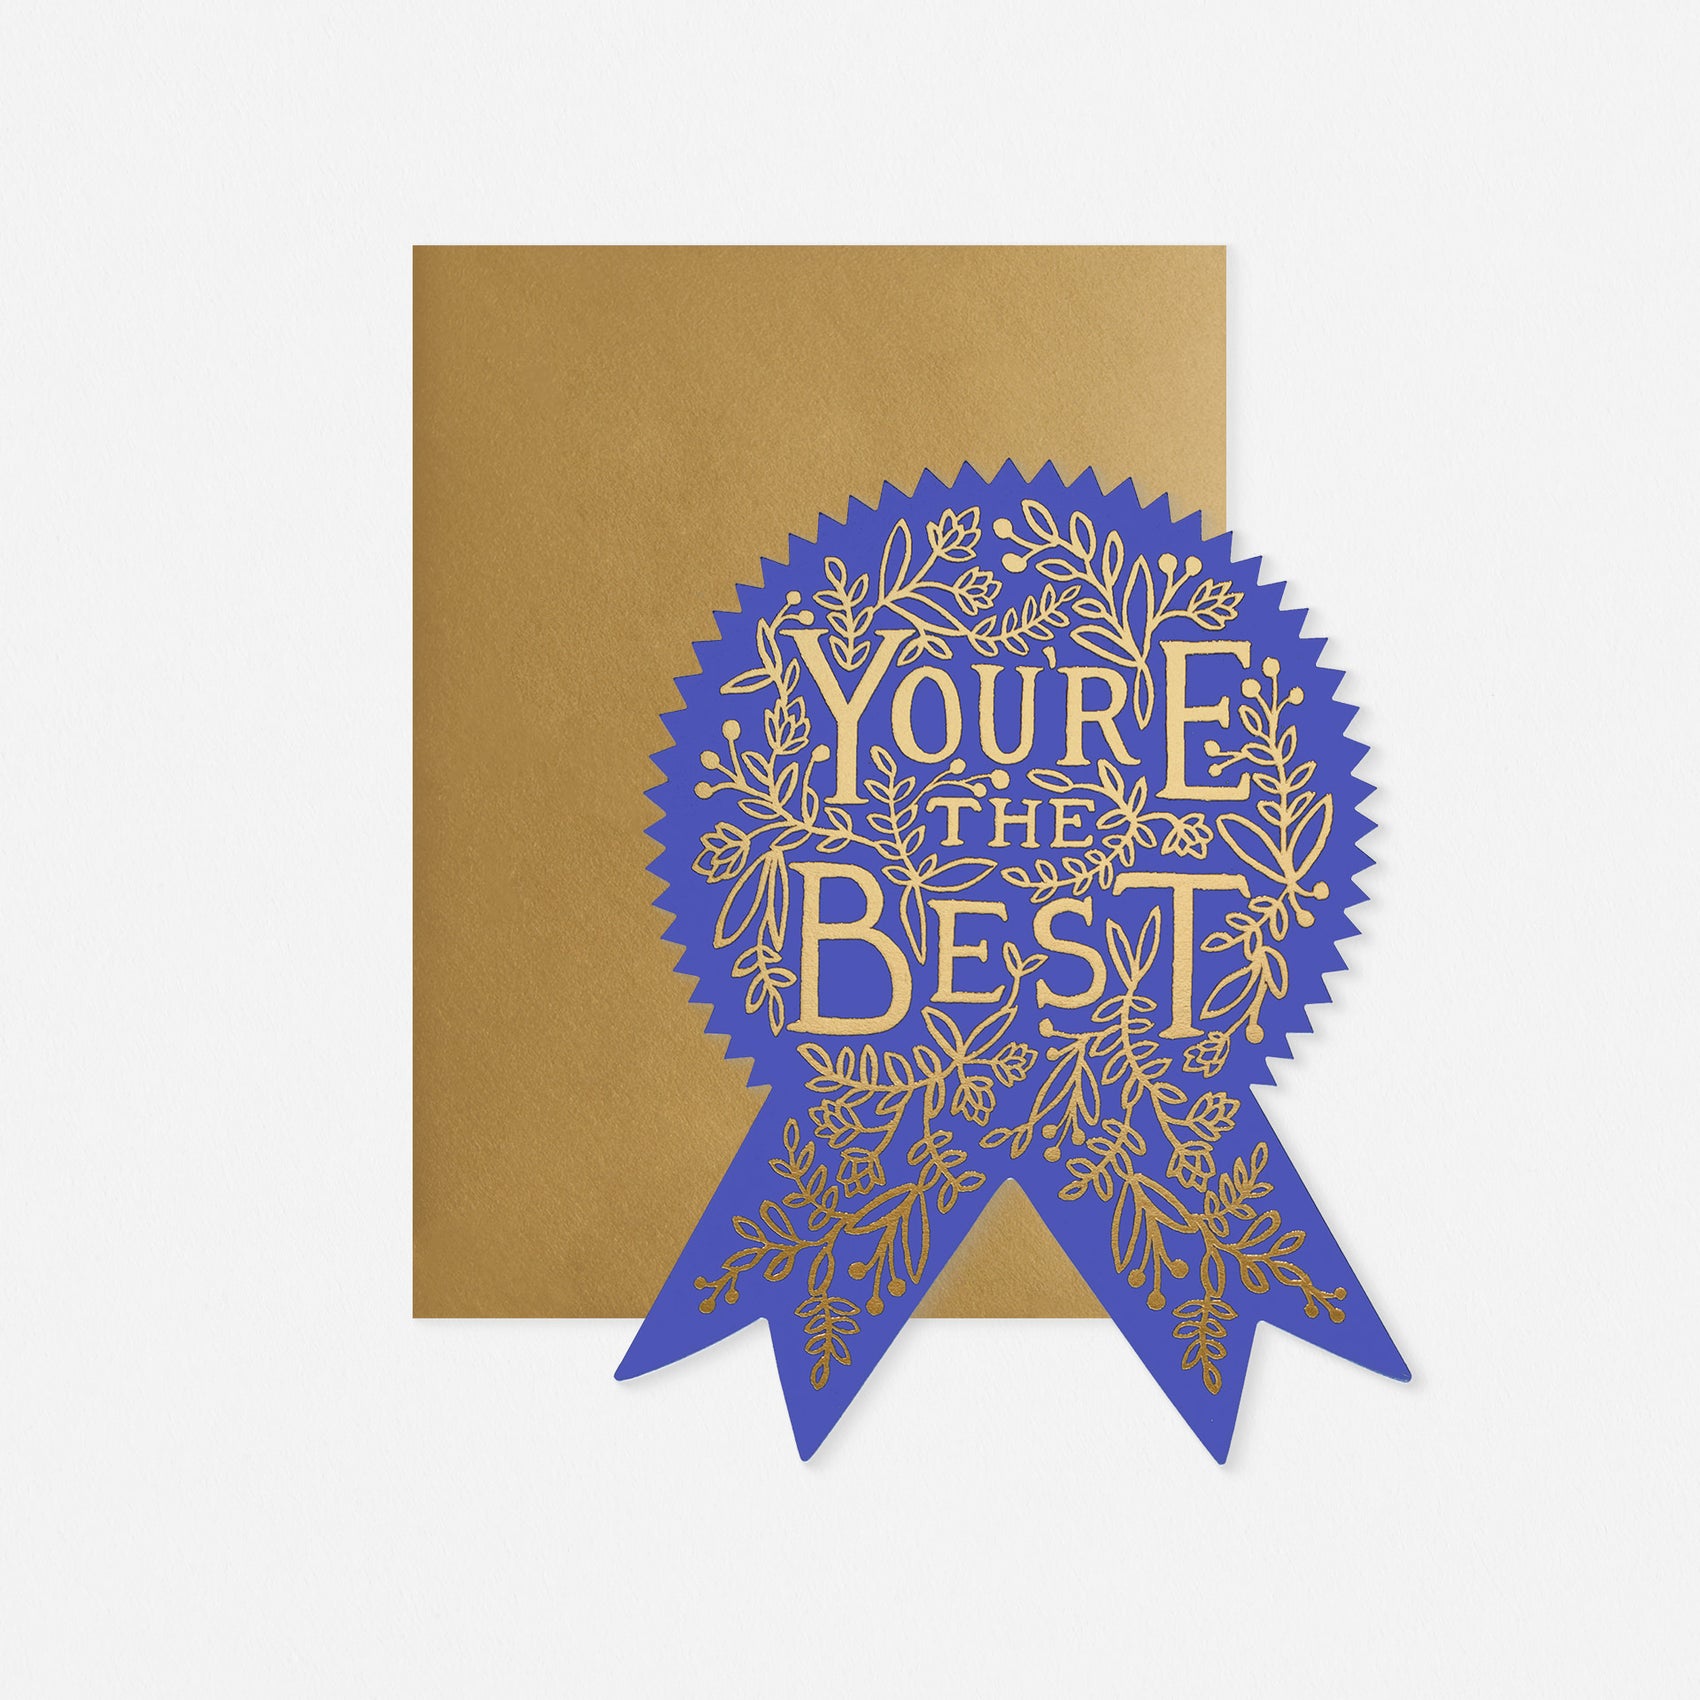 You're The Best Greeting Card